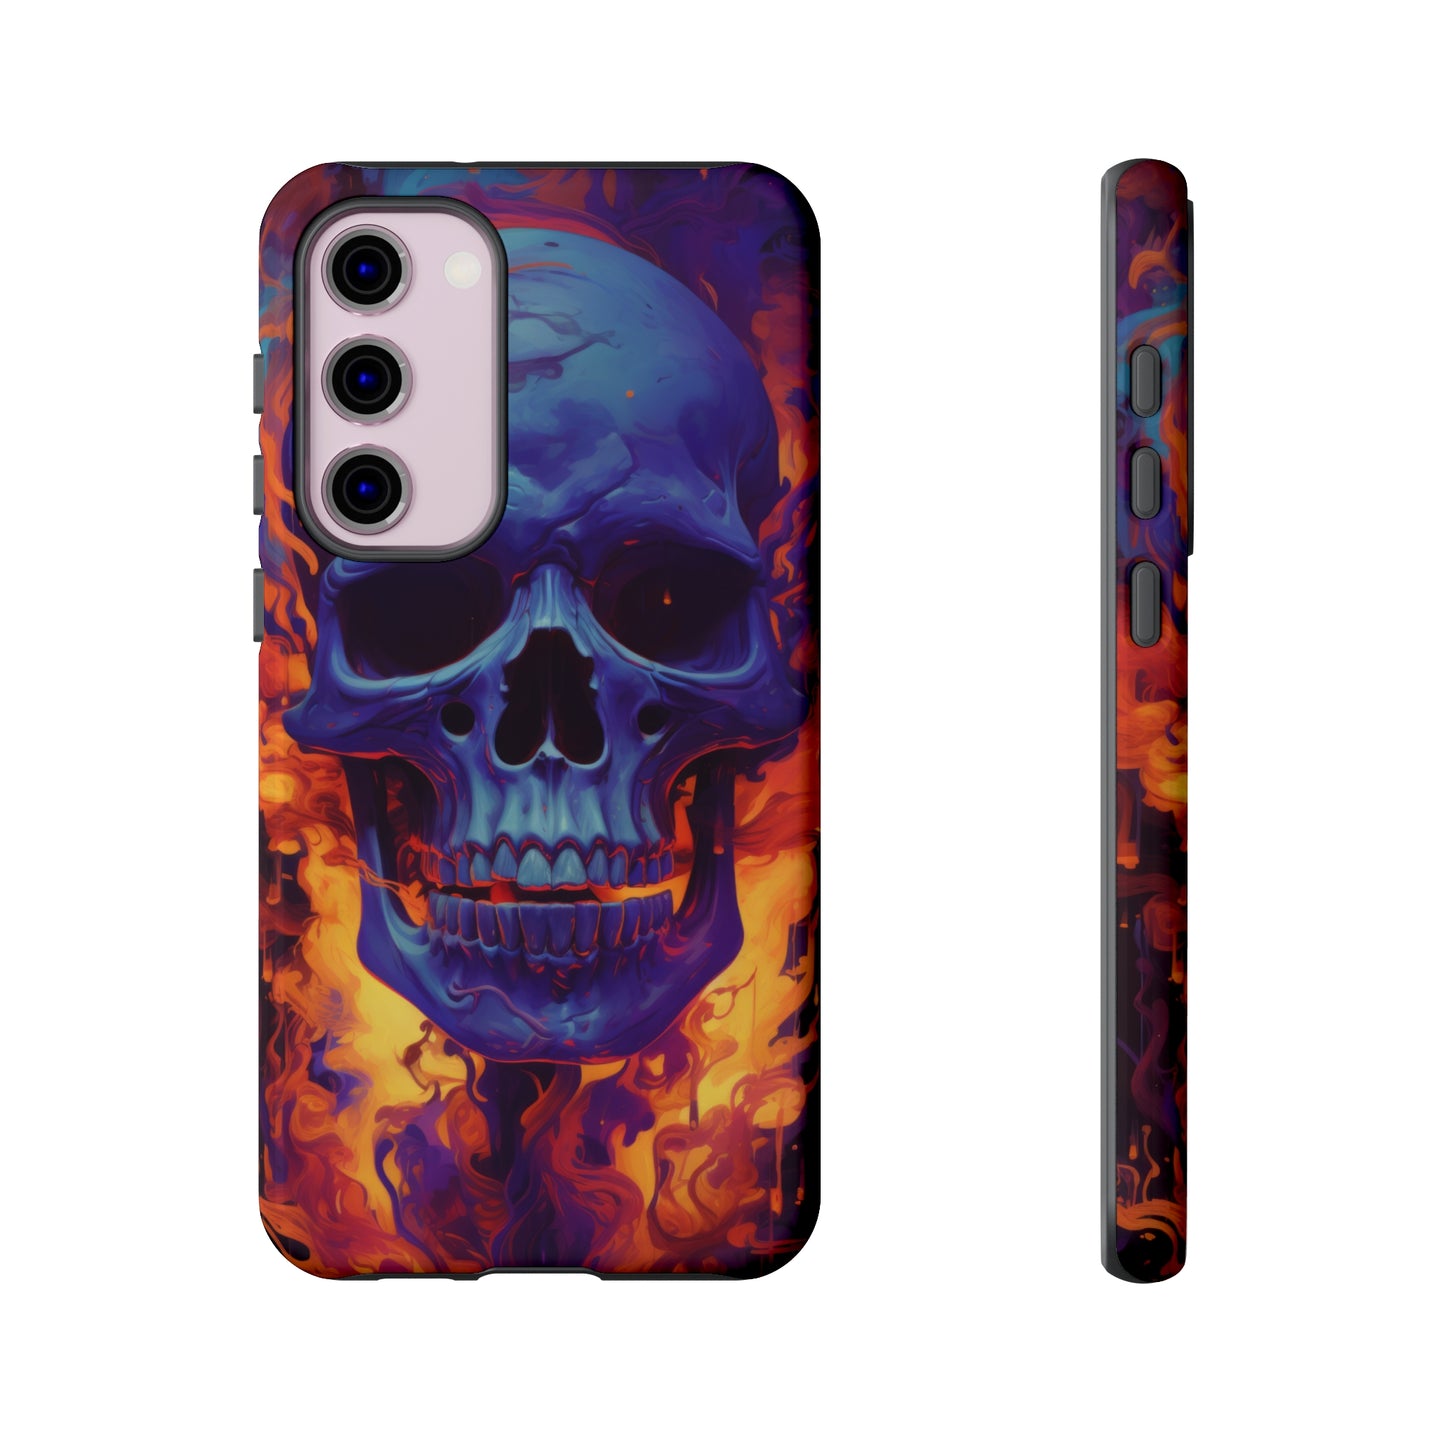 Vivid Eruption: Purple Skull and Colorful Smoke Phone Case for iPhone, Samsung, Pixel